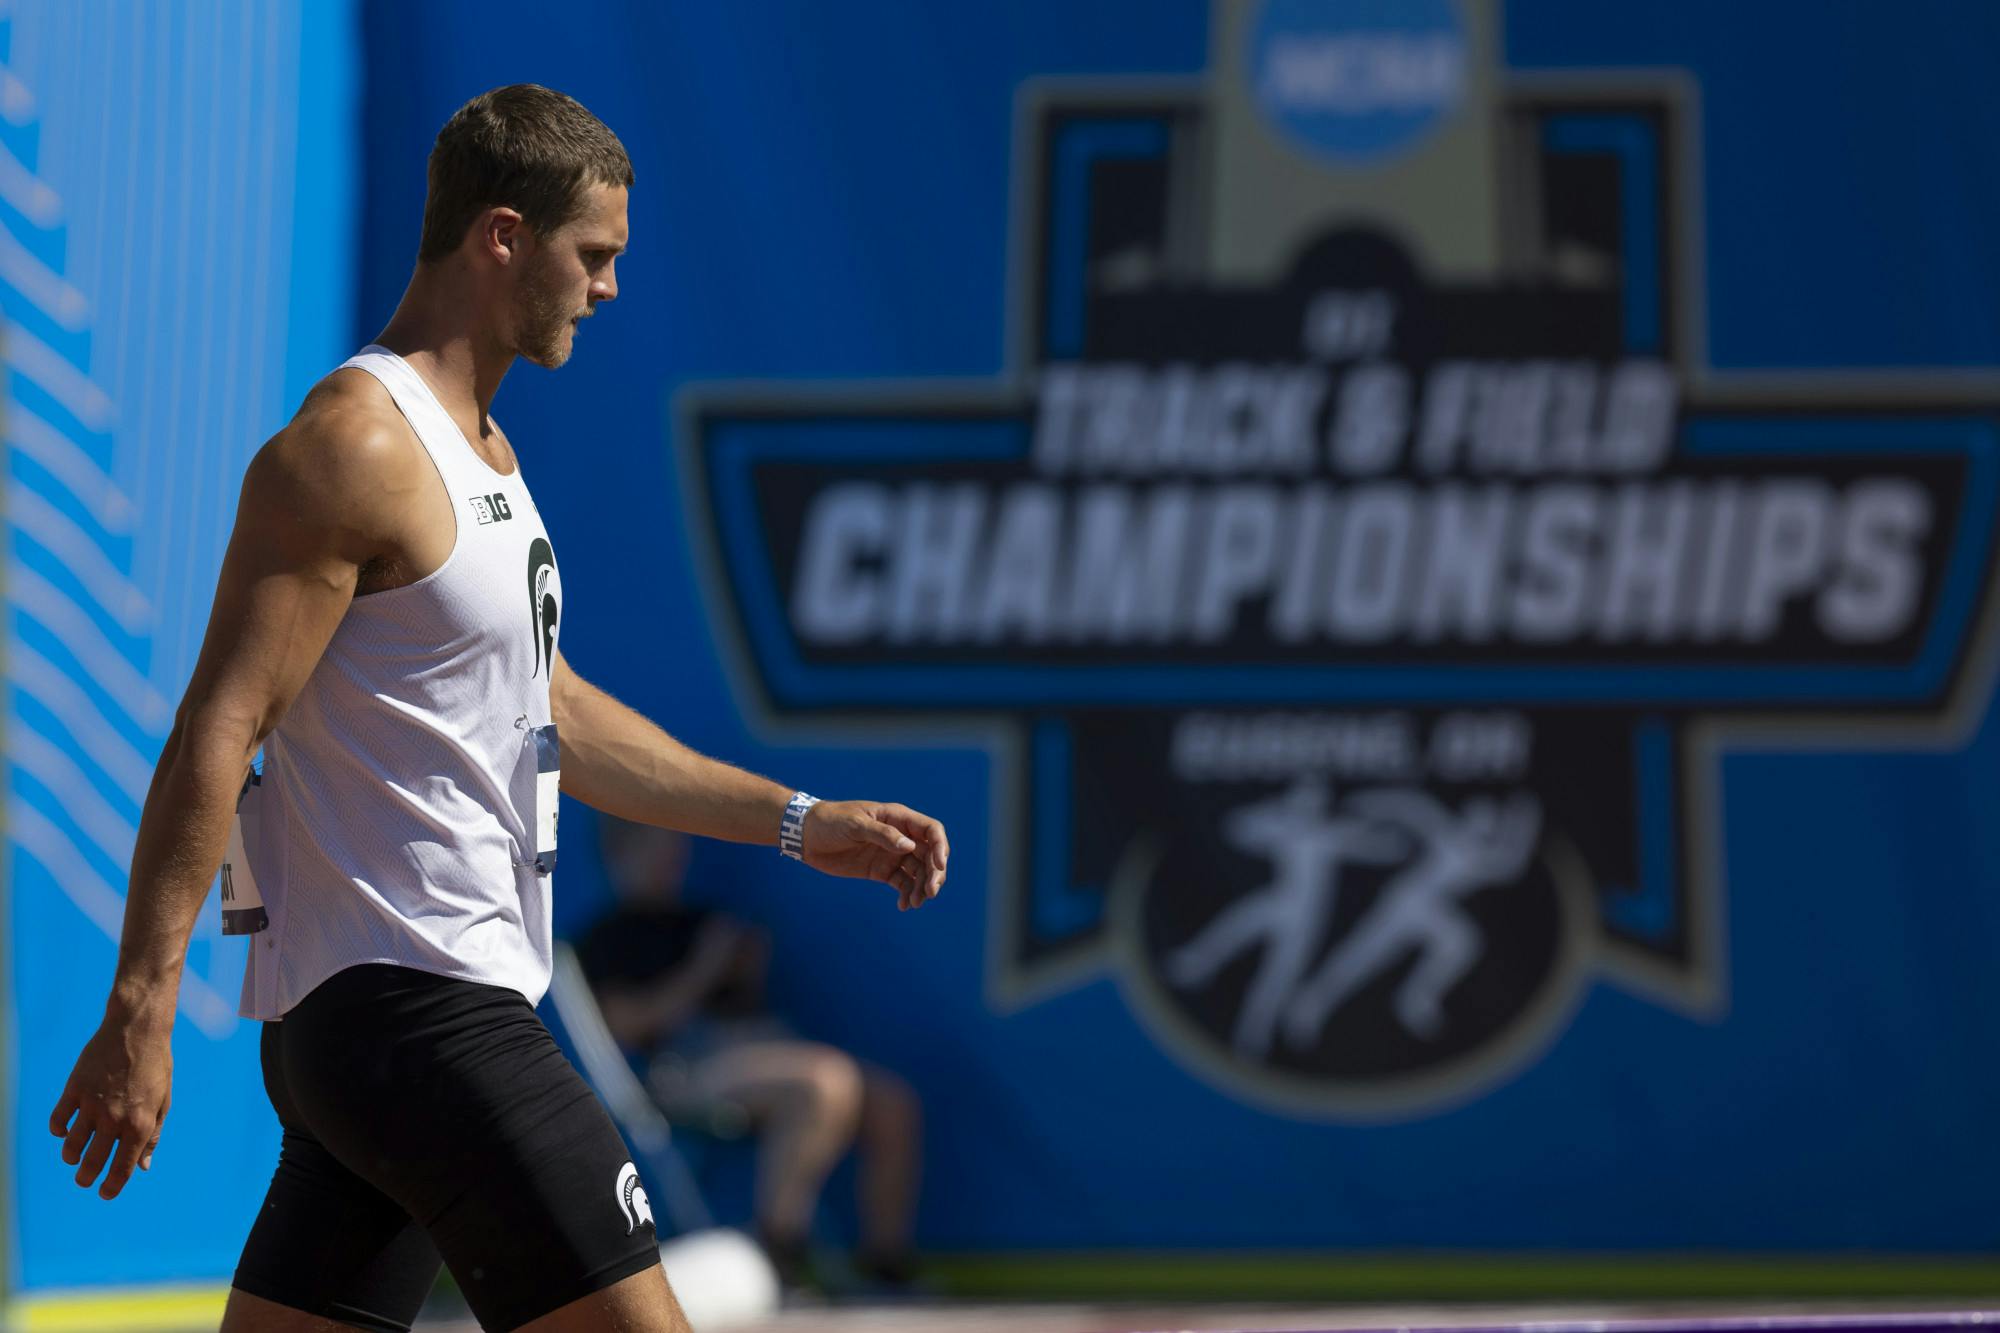 <p>Michigan State University decathlete Ryan Talbot performing at the NCAA Championships in Eugene, Oregon. Photo courtesy of Logan Hannigan-Downs of Michigan State Athletics.</p>